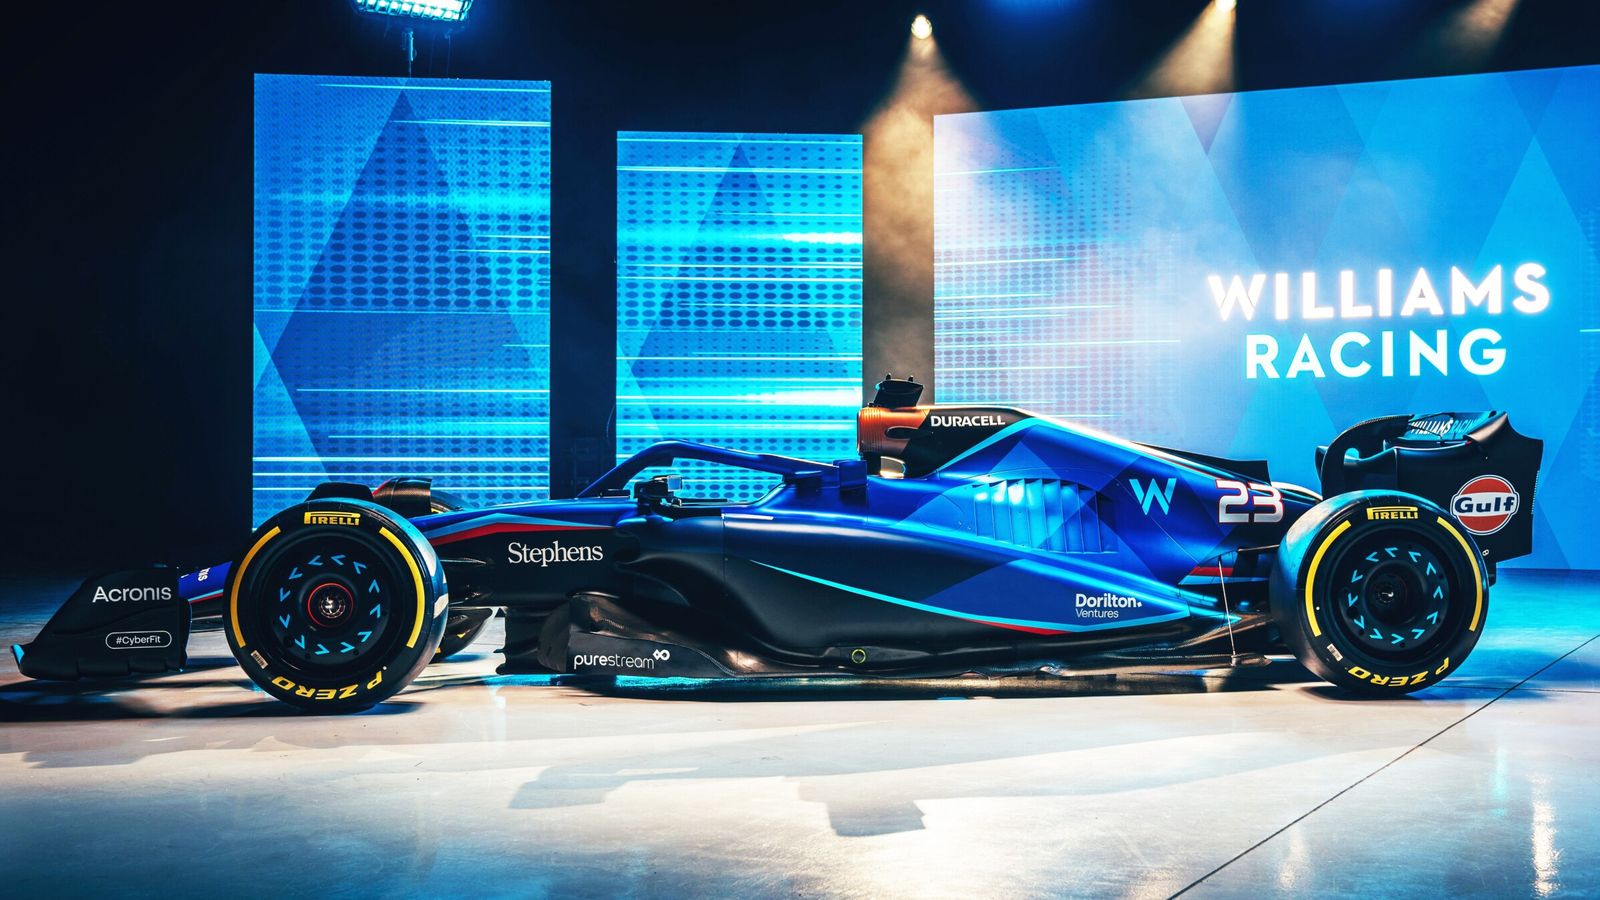 Formula 1 launches: Williams reveal sleek new car livery and Gulf Oil partnership for 2023 season | F1 News